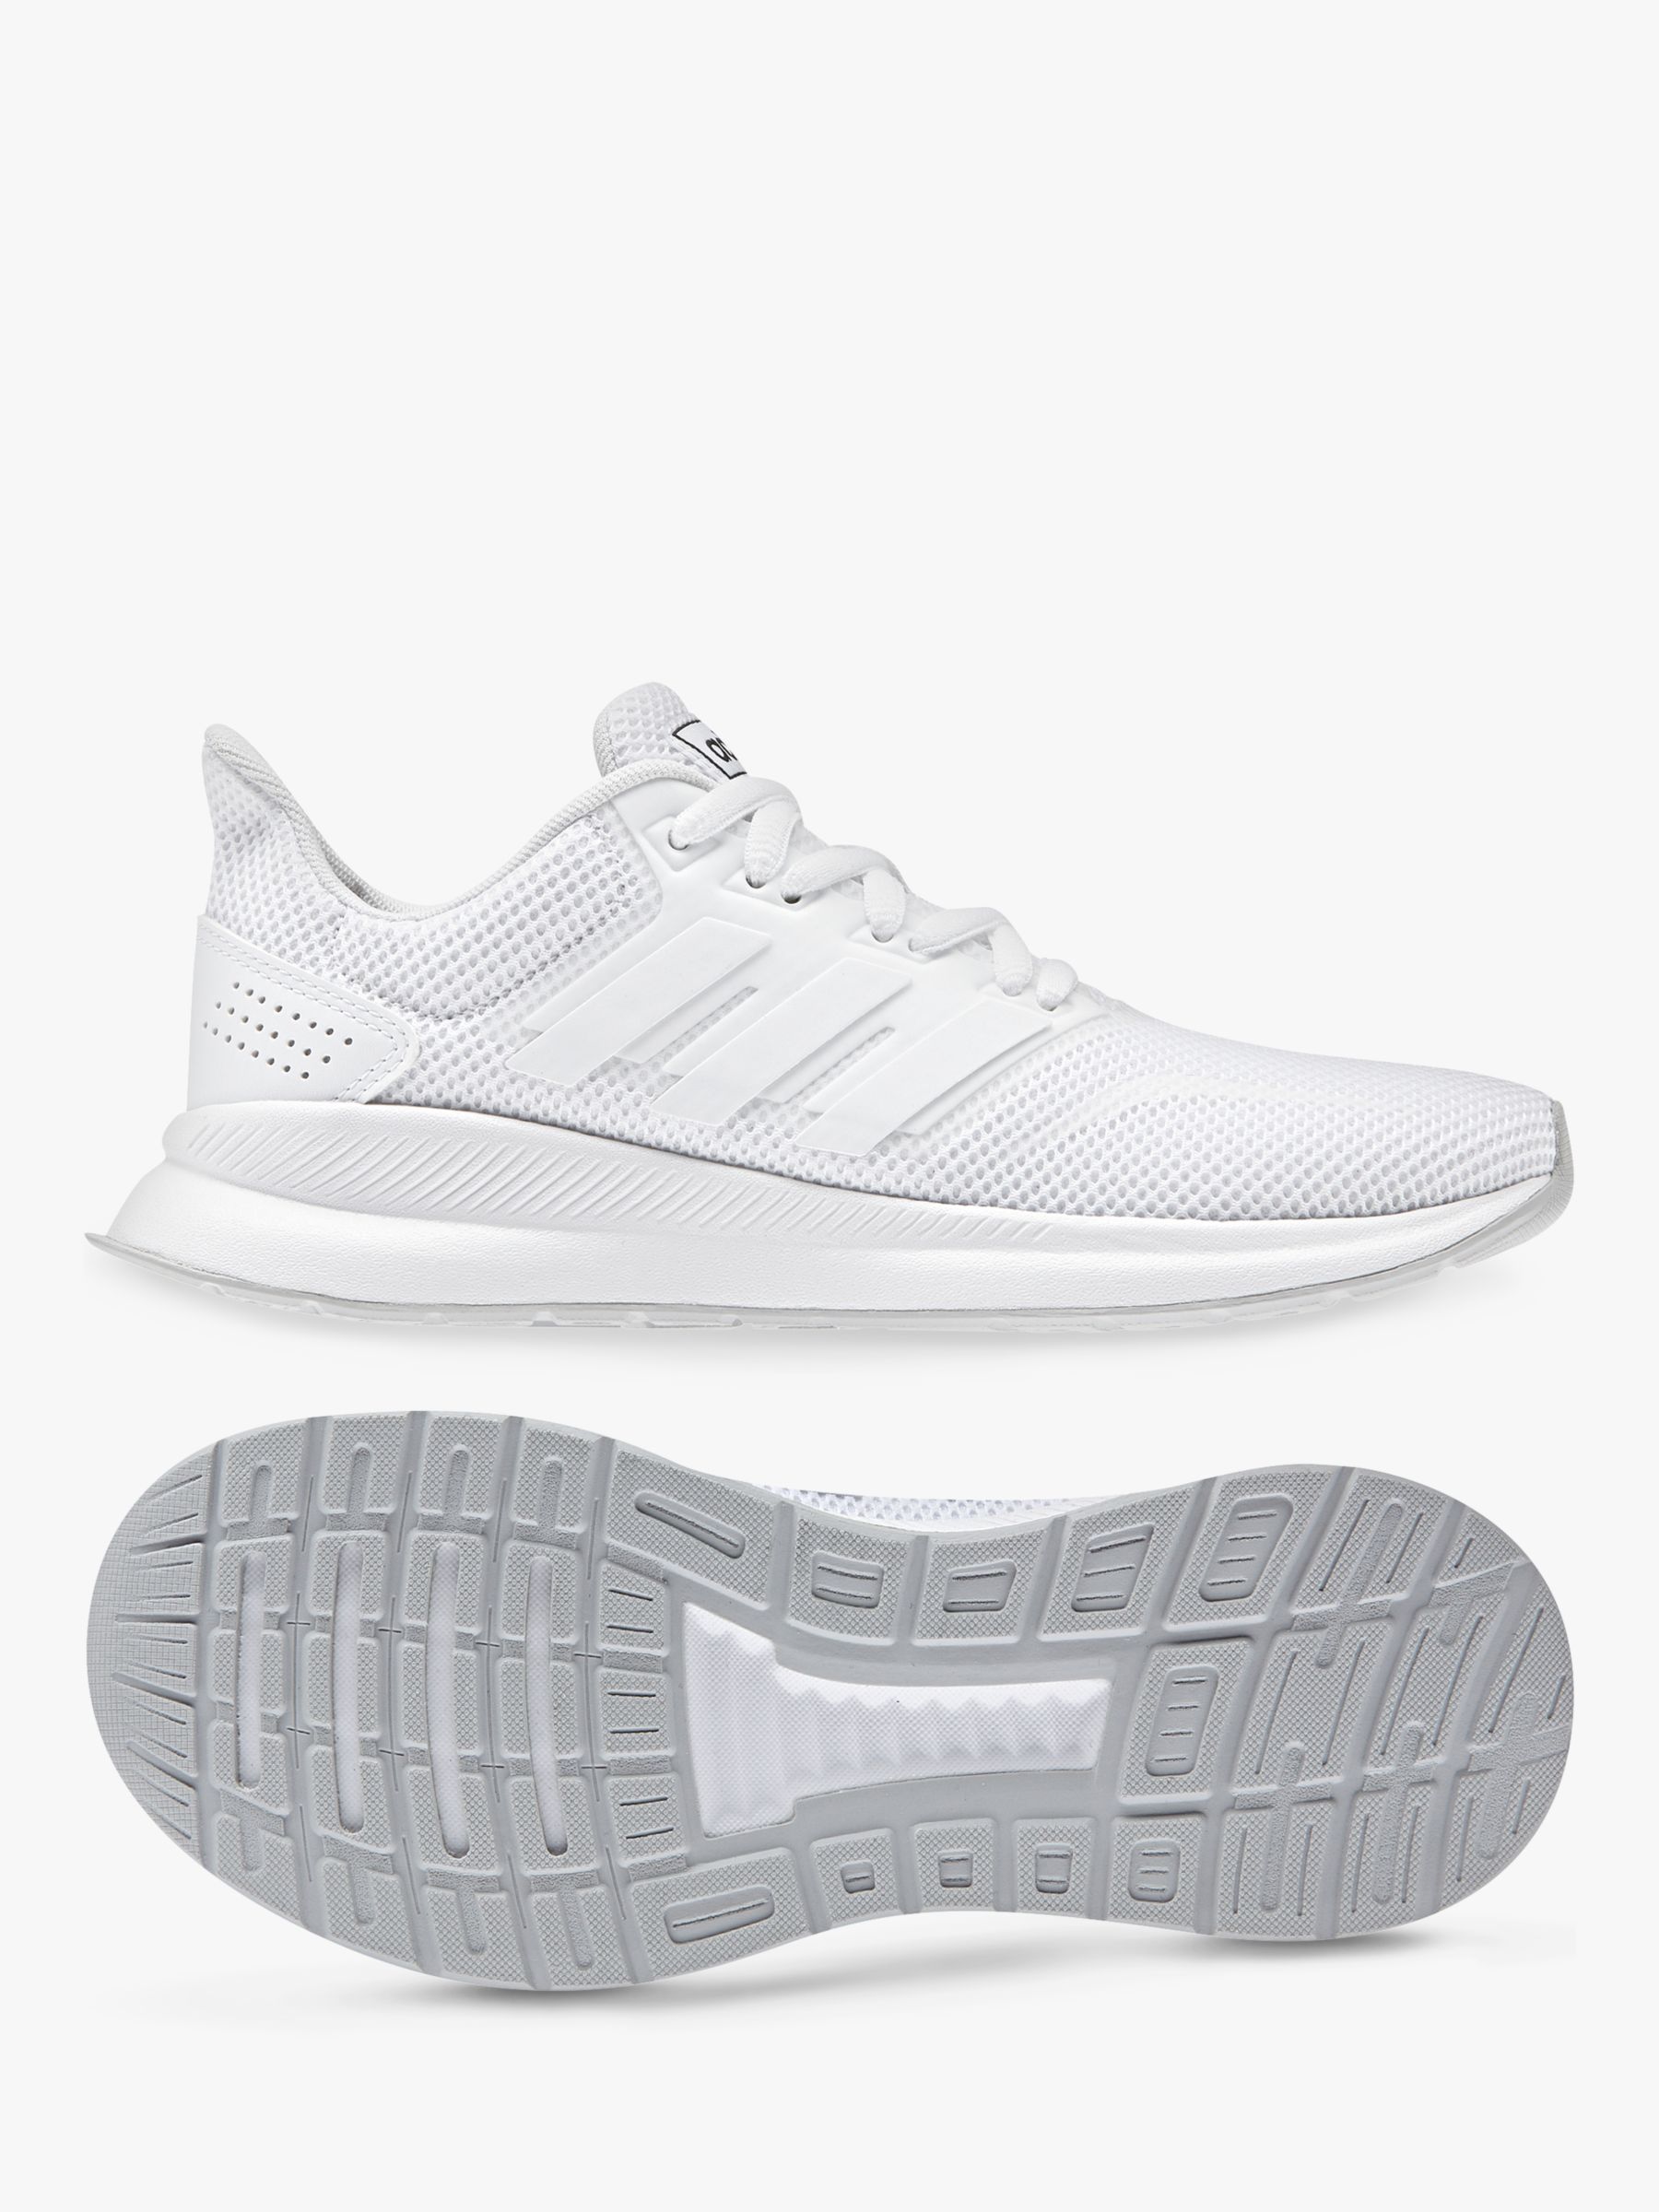 adidas all white trainers